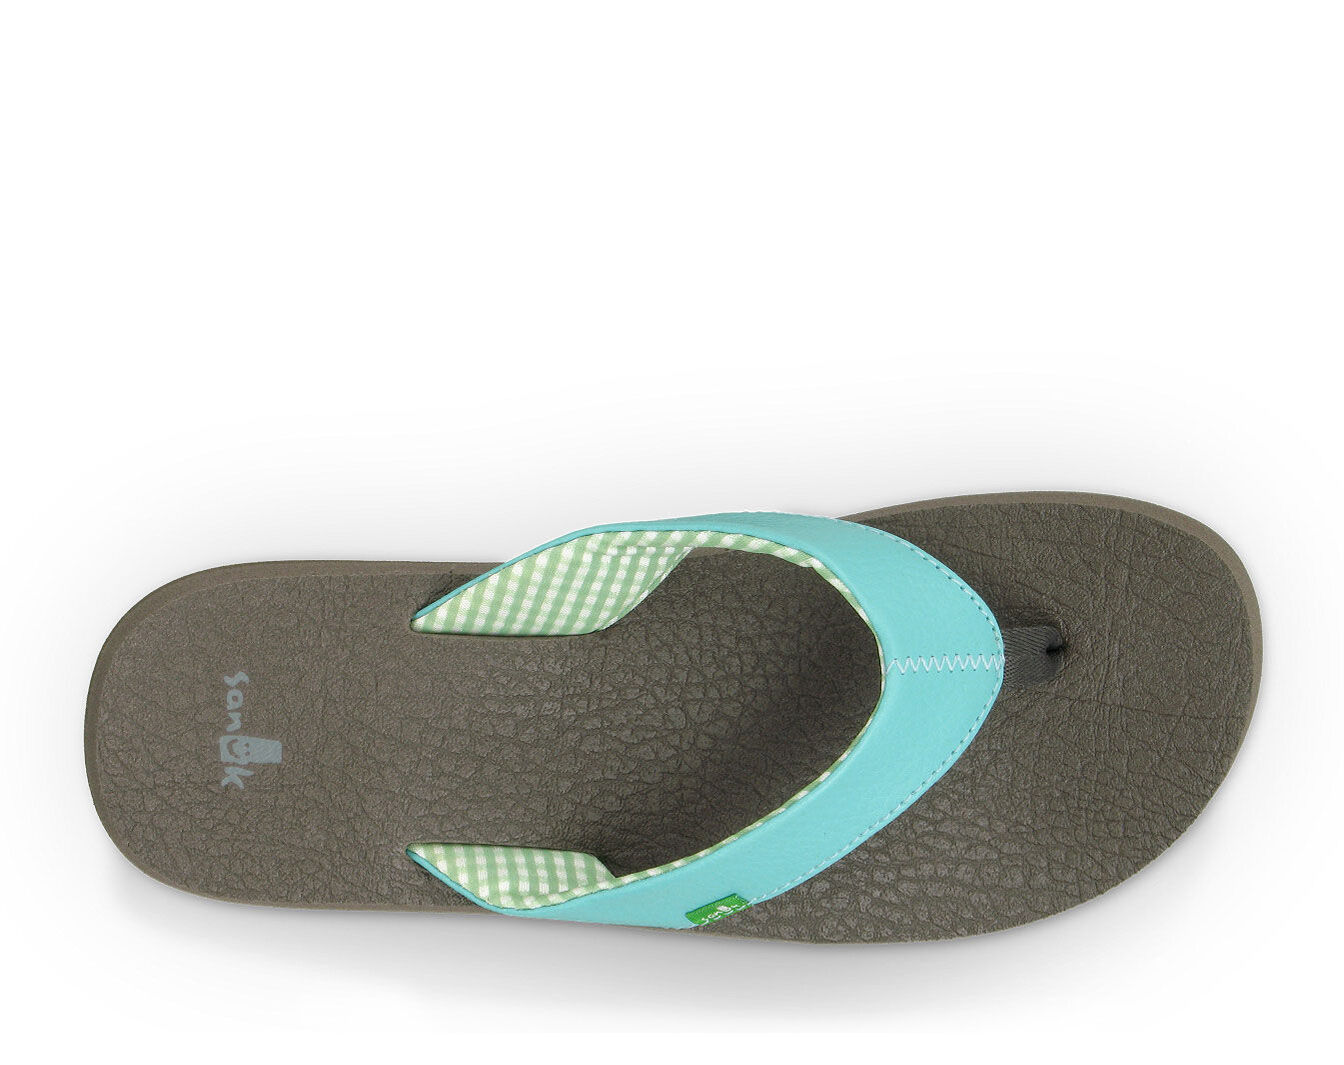 sandals made out of yoga mats